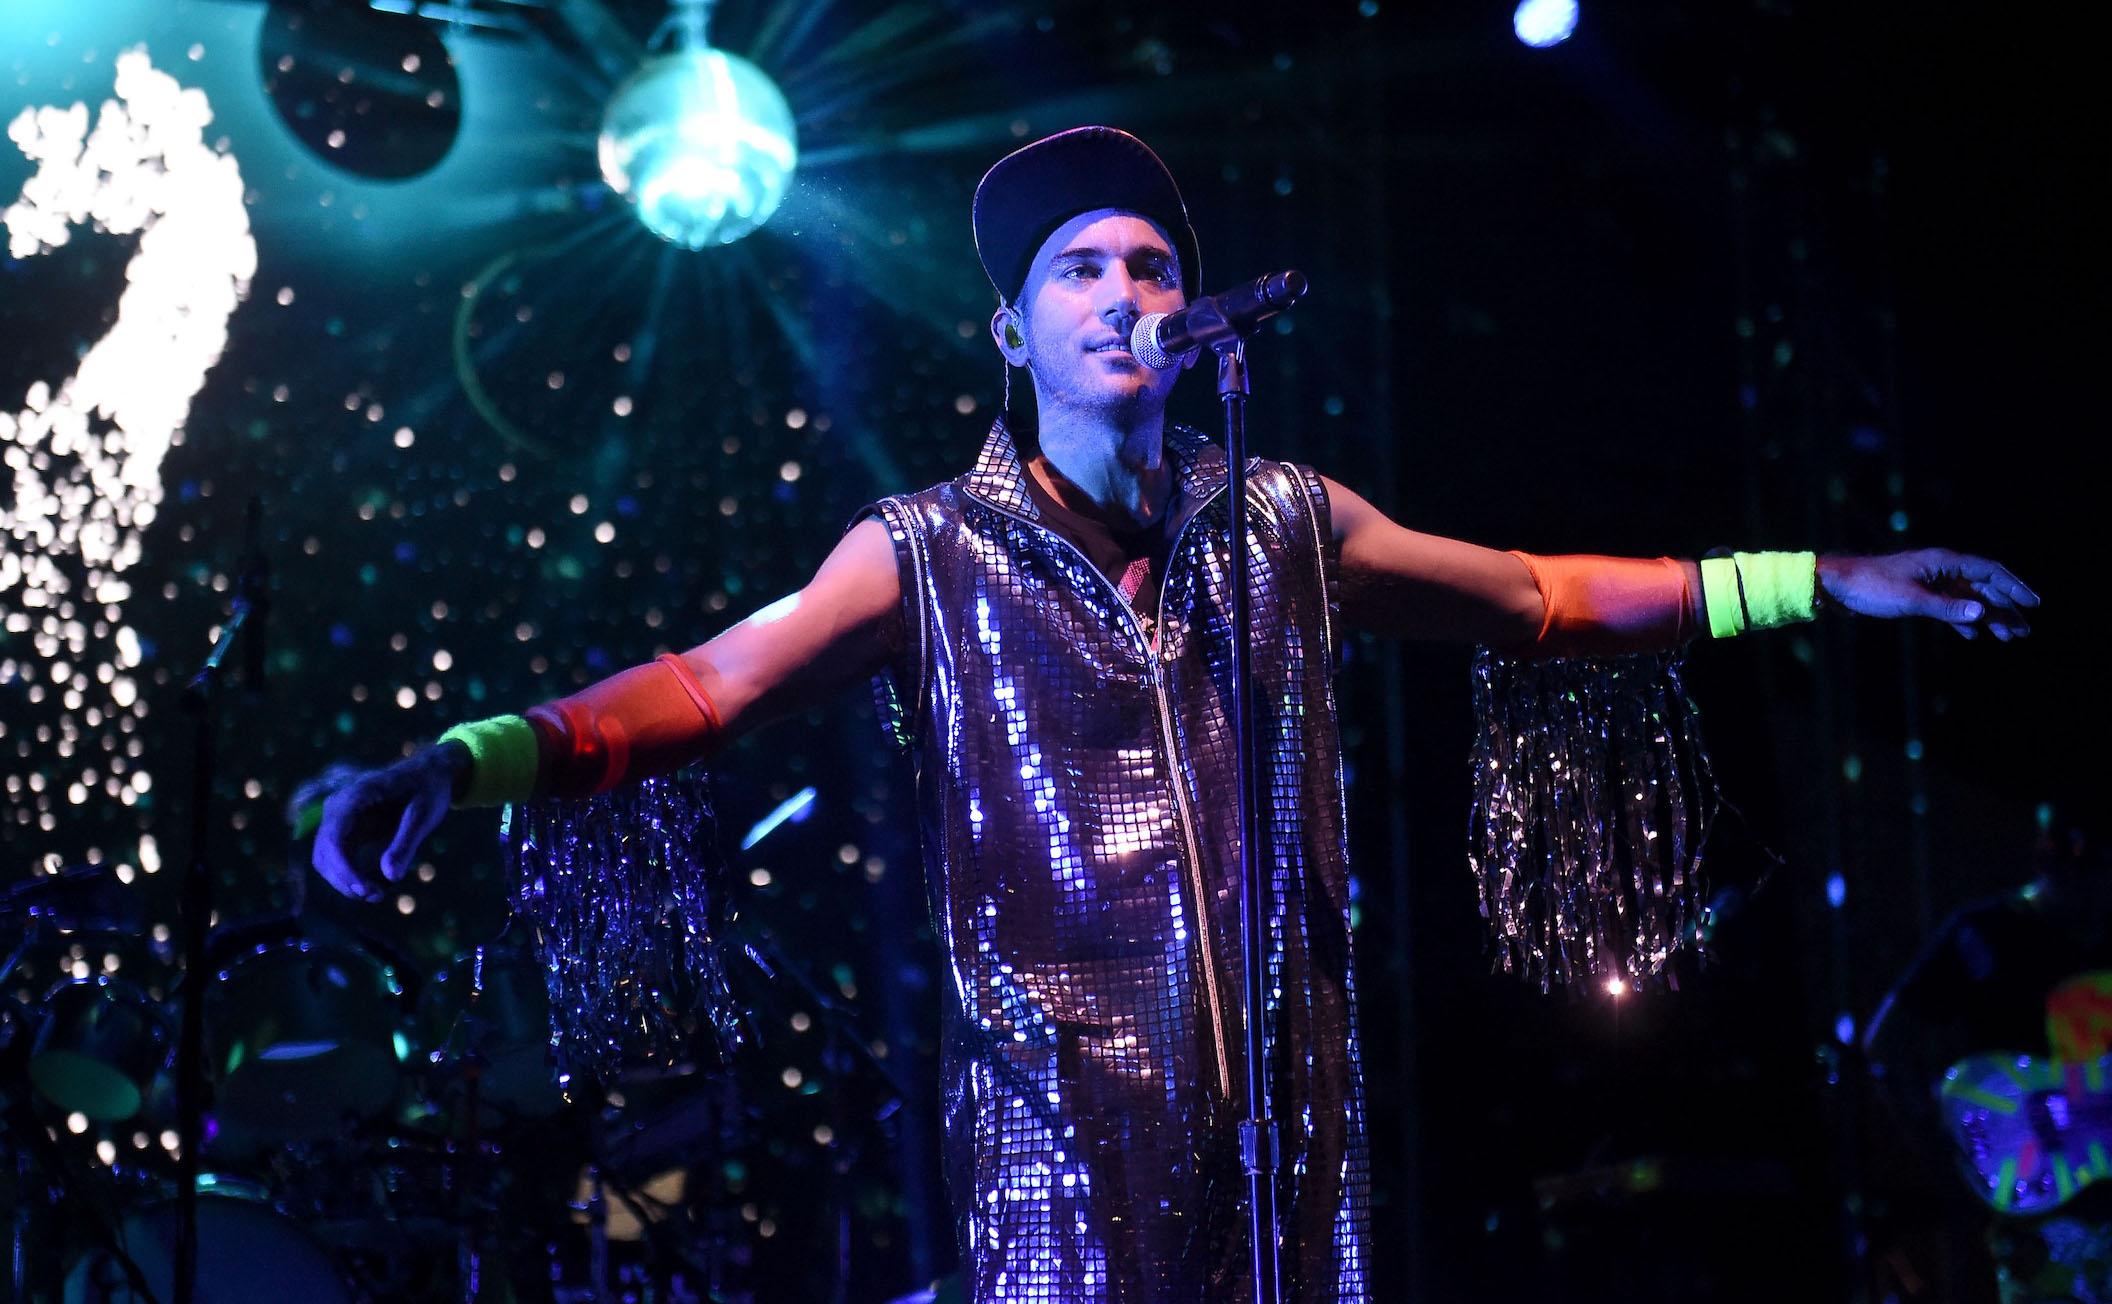 Sufjan Stevens performs onstage at the 2016 Panorama NYC Festival, Day 2 at Randall's Island on July 23, 2016 in New York City.